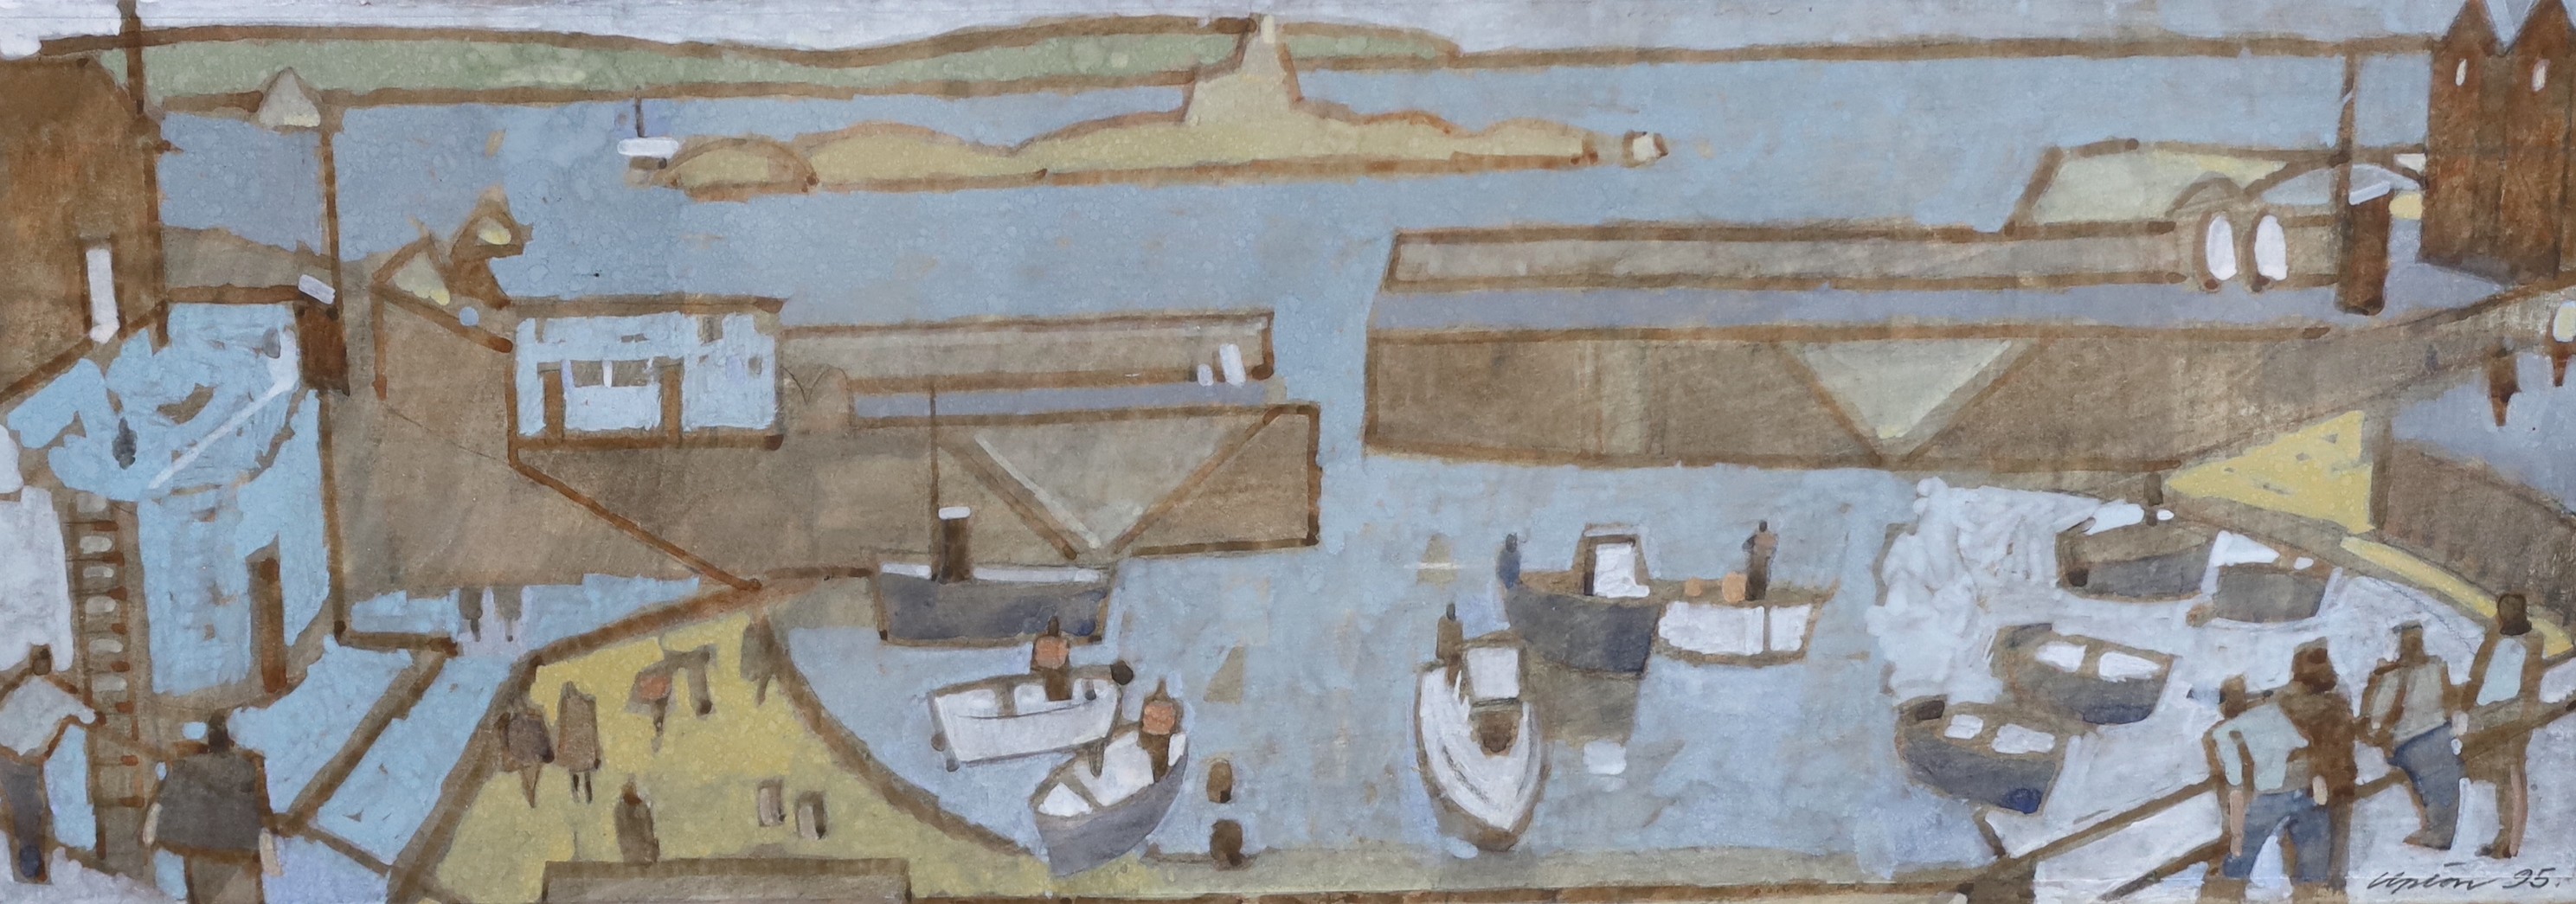 Michael Upton (1938-2002), Figures overlooking a harbour, watercolour on brown paper